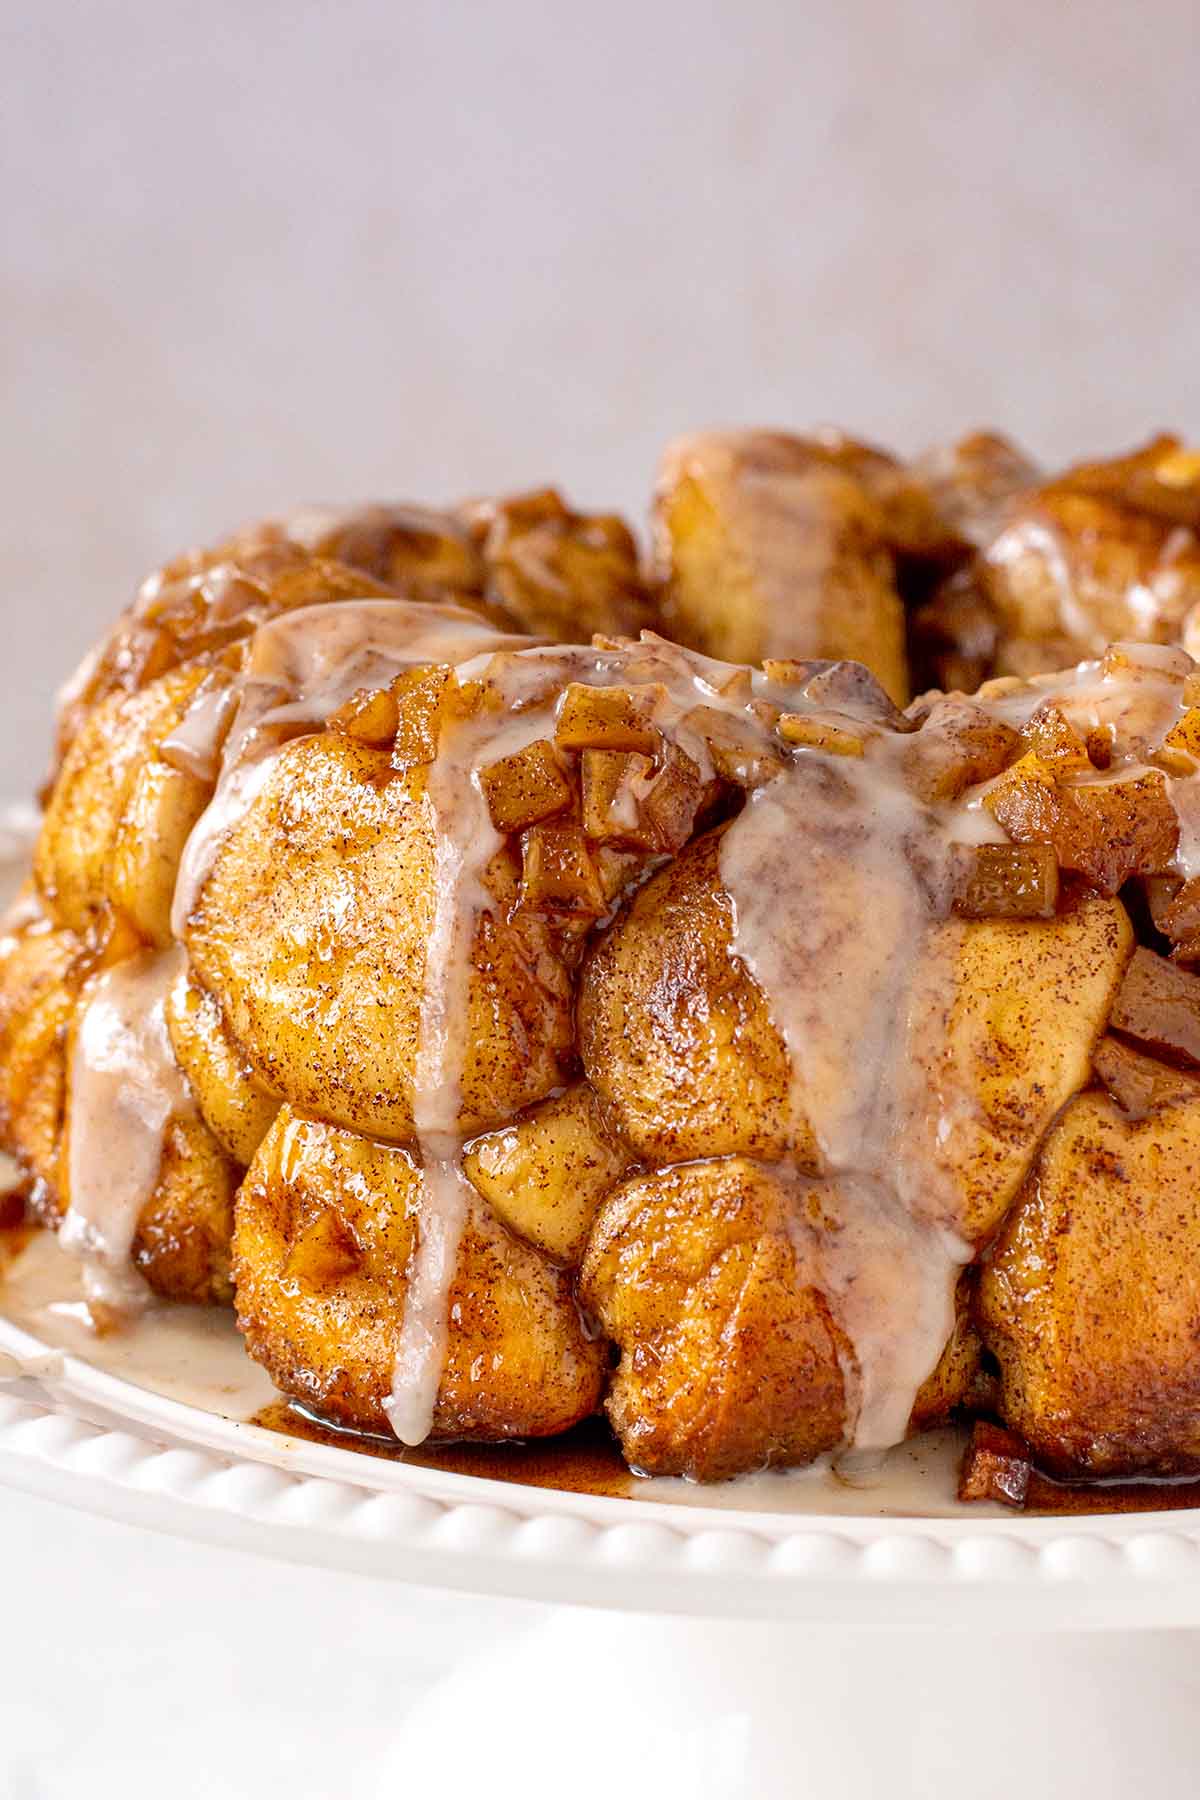 Close up shot of the monkey bread with the glaze and caramelized apples.